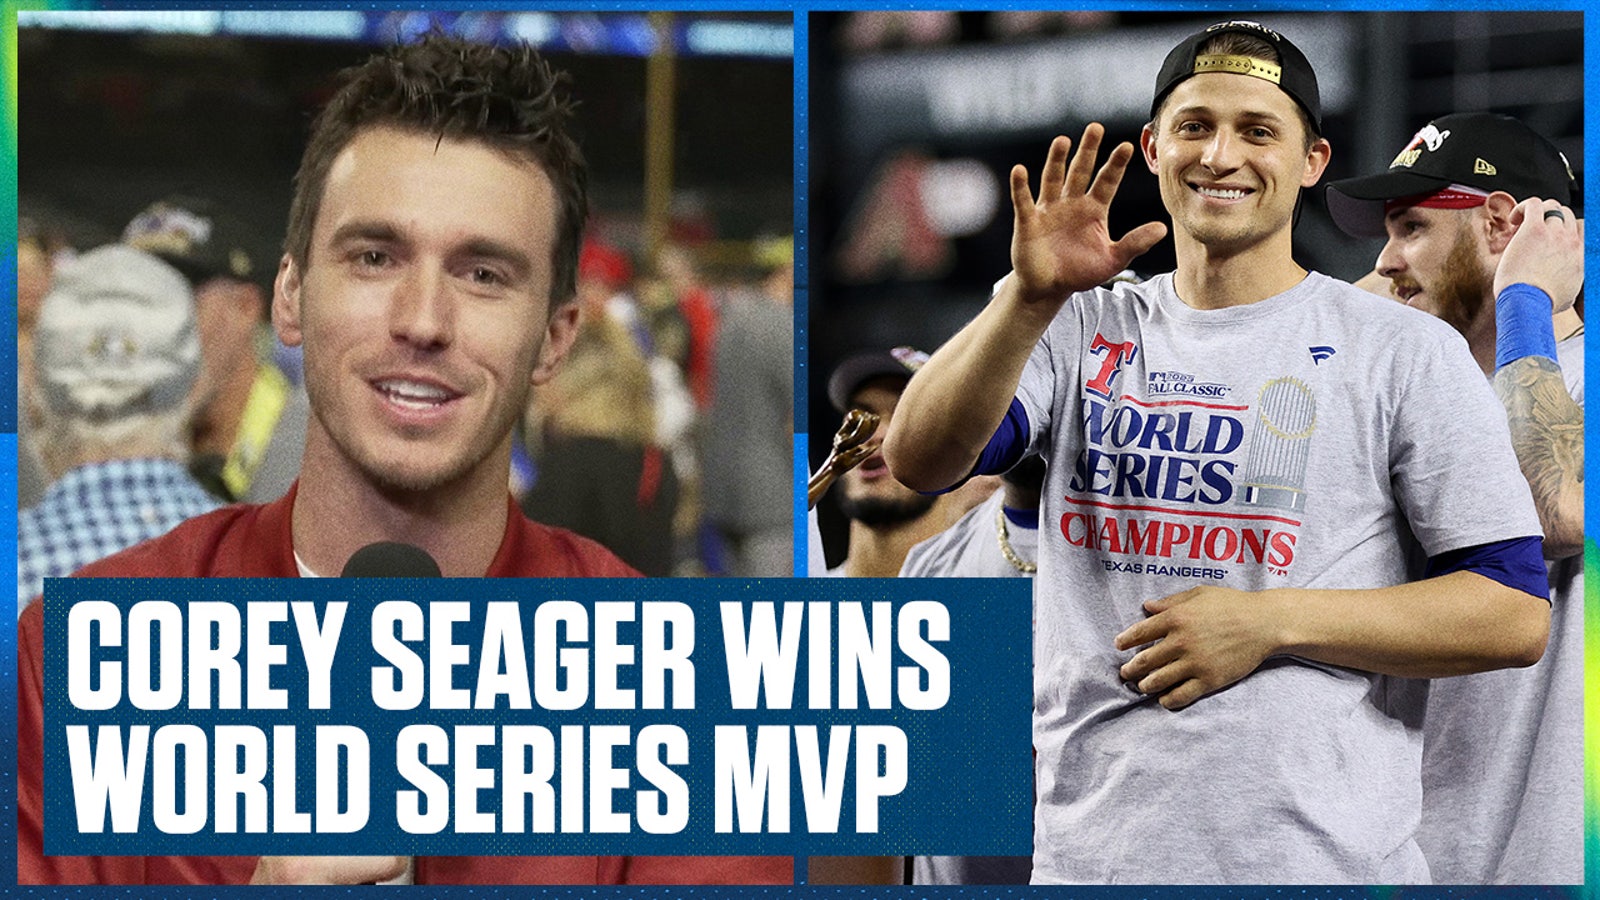 Corey Seager wins his second World Series MVP